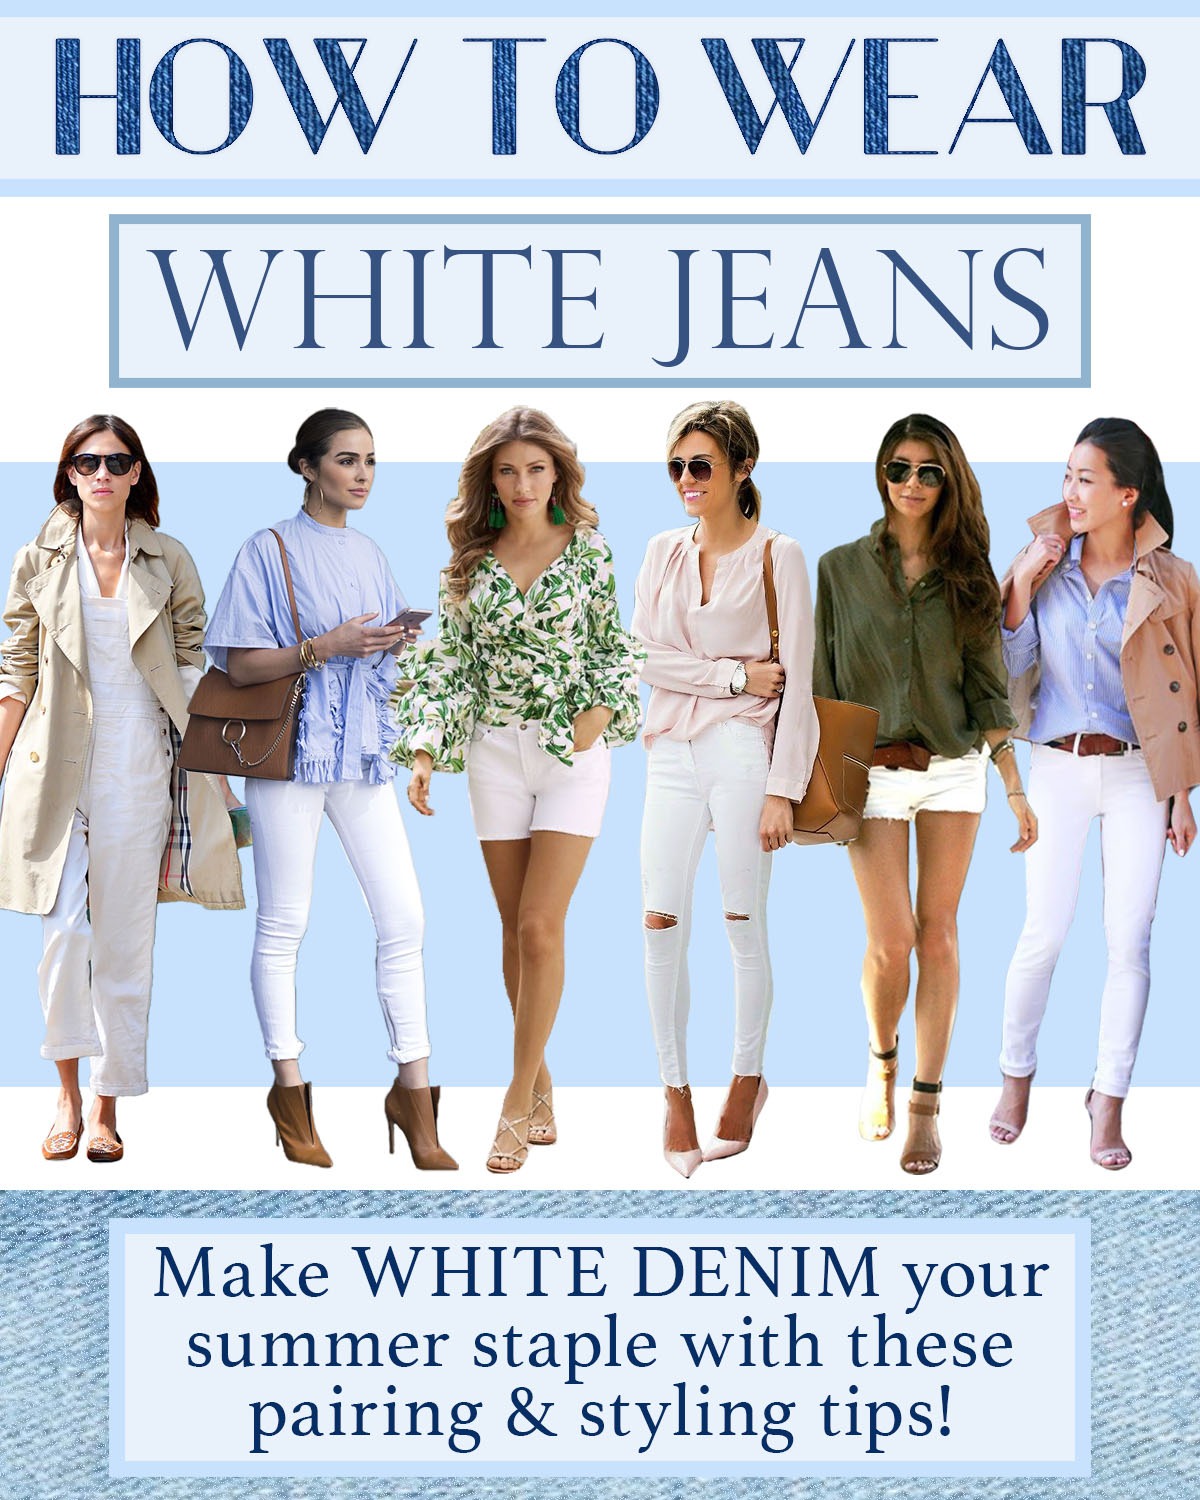 How To Wear White Jeans - Madison to Melrose